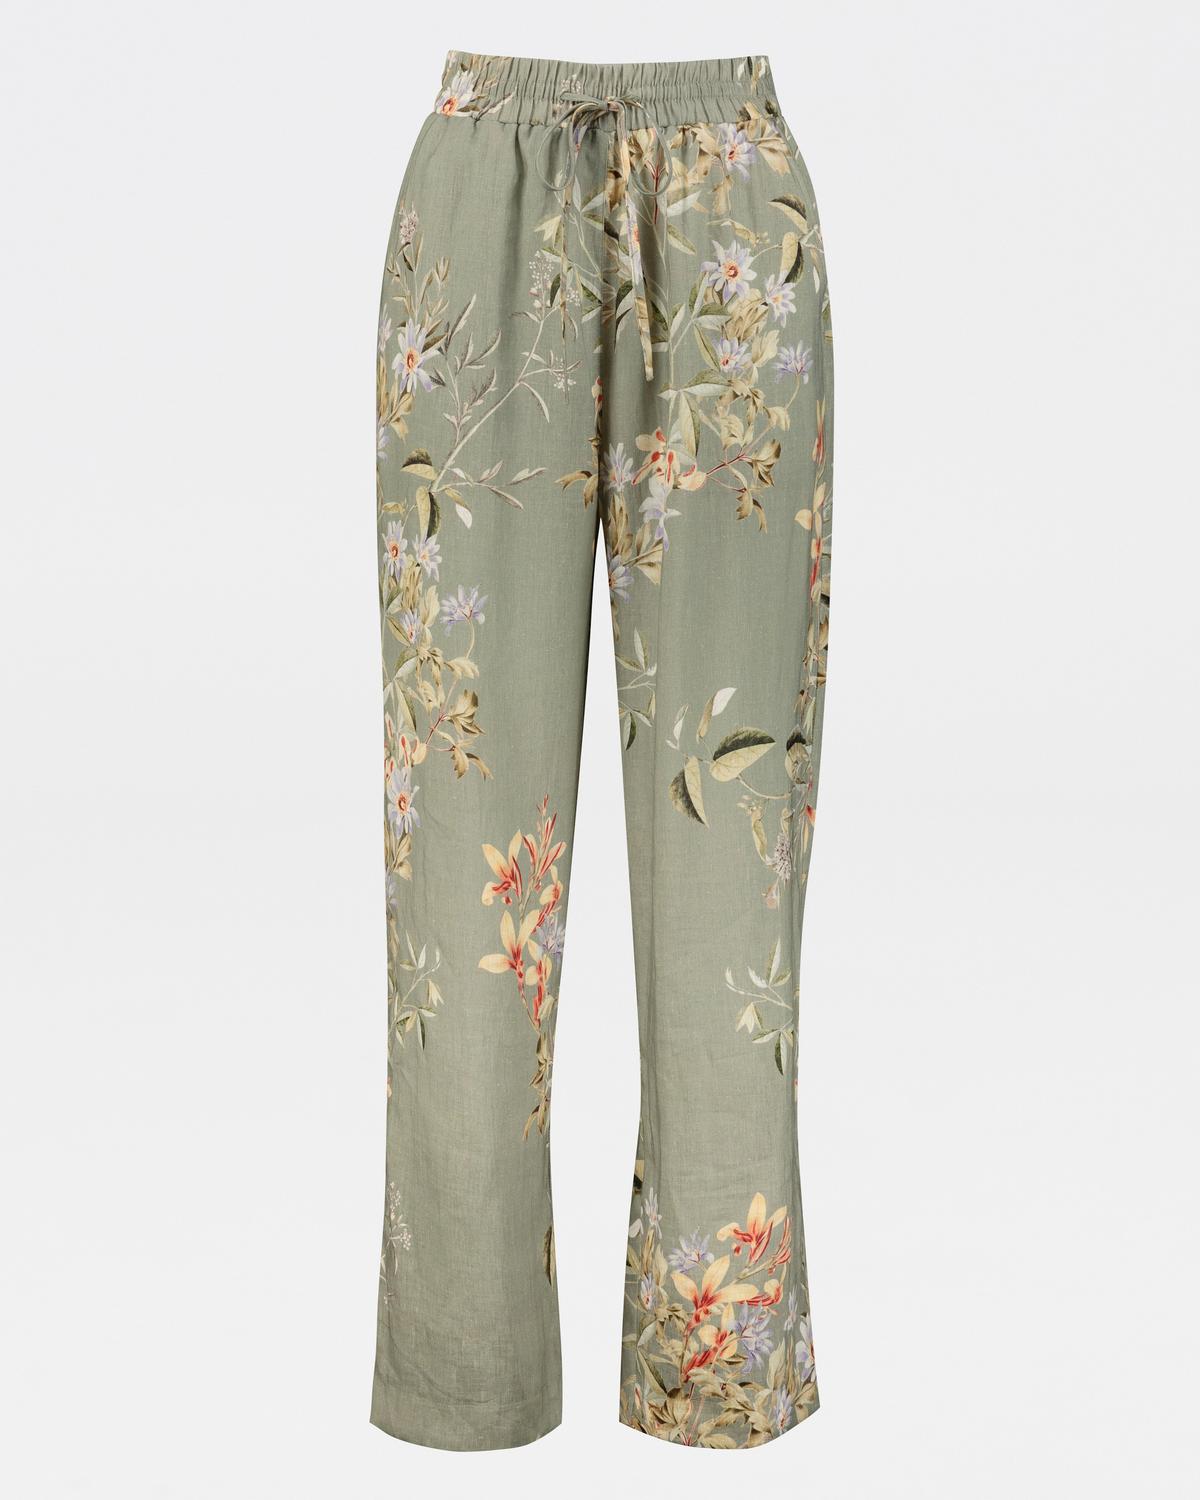 Poetry Ana Greens Linen printed pant -  green